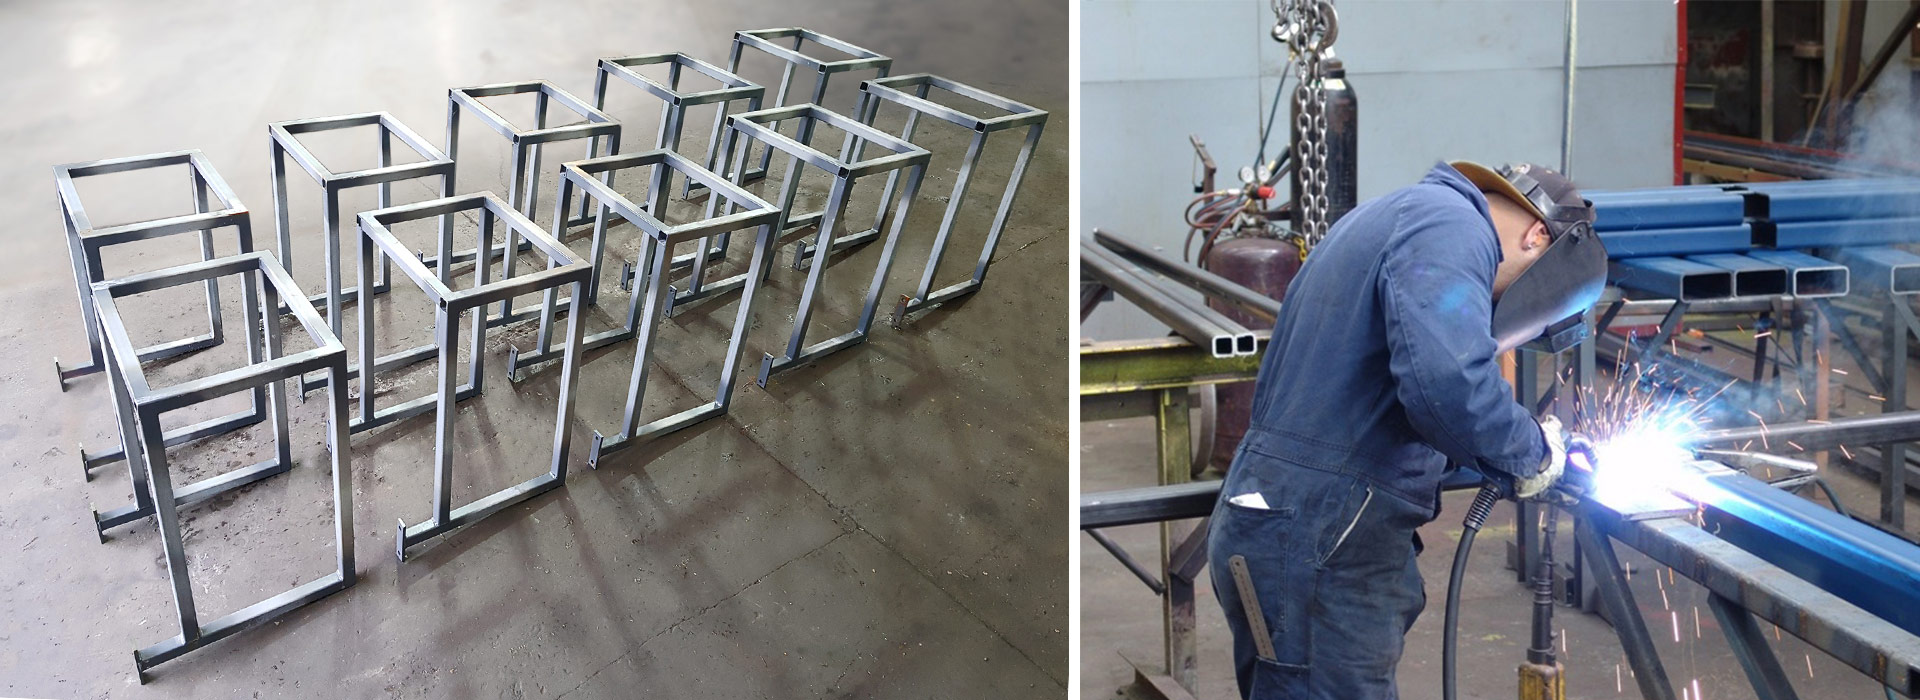 Steel fabrication services are available from McGrath Industries in New Zealand